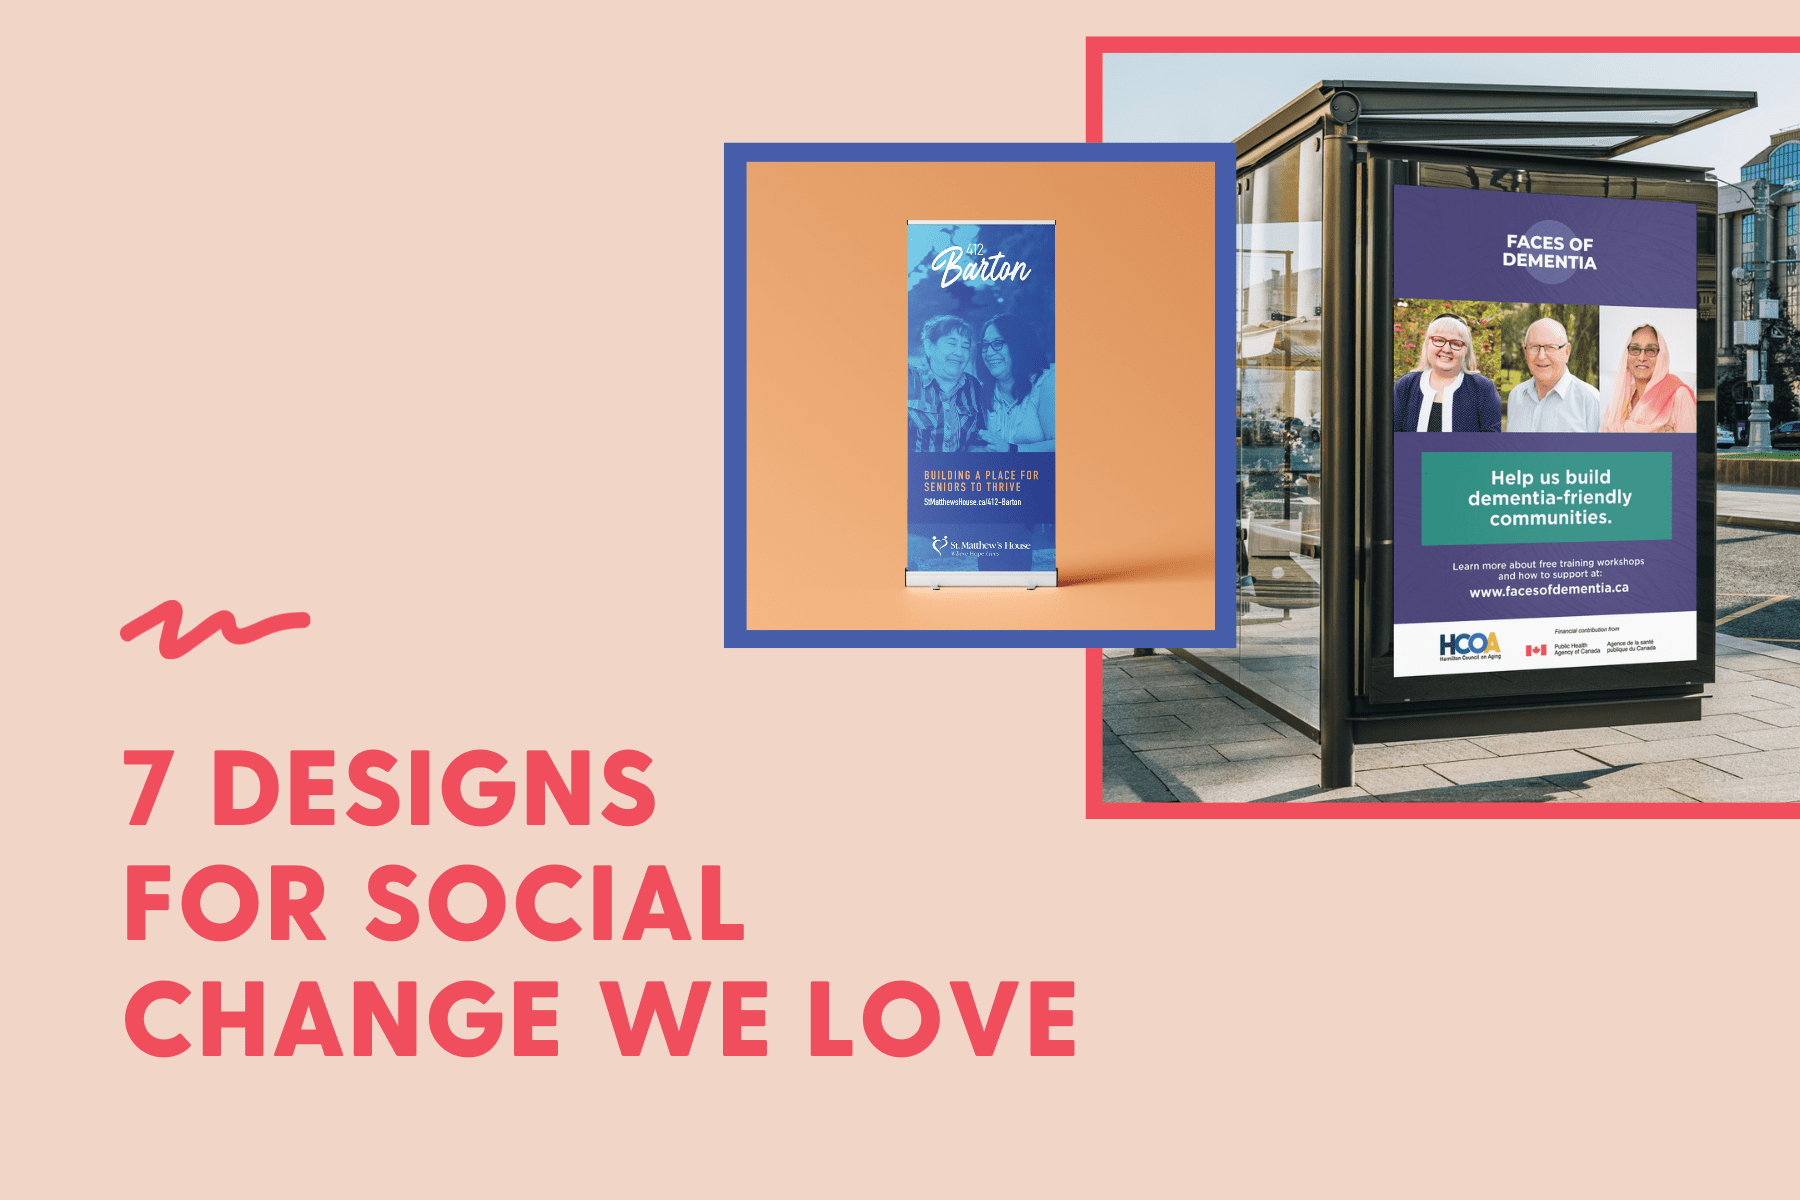 Pink graphic that reads "7 designs for social change we love" in red writing, with two images of campaign collateral placed on top